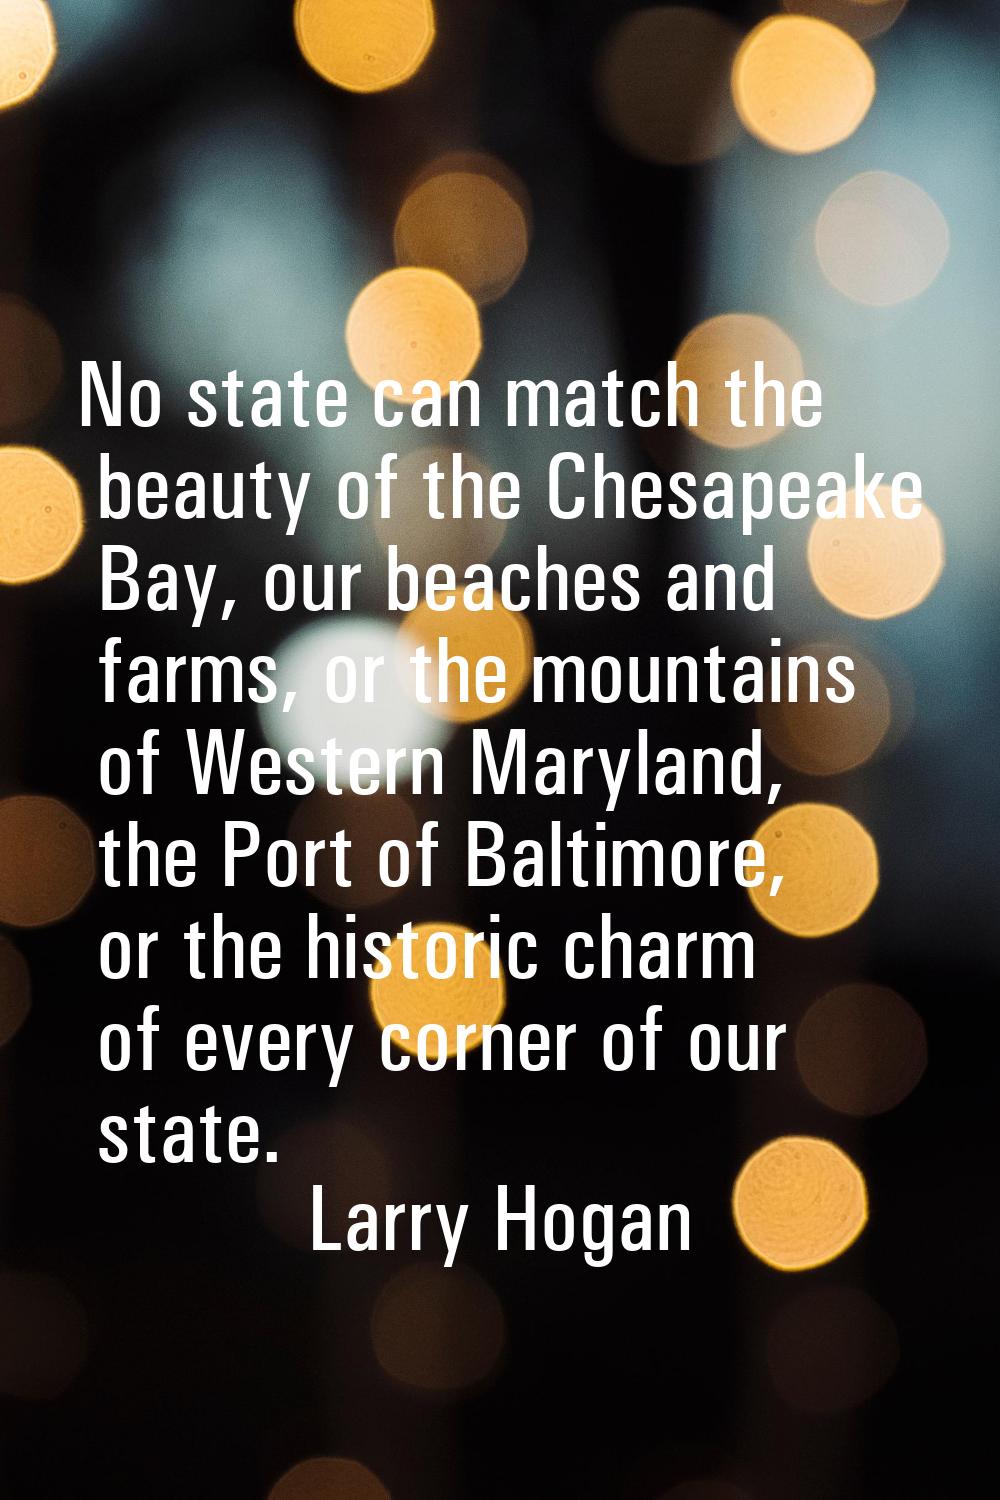 No state can match the beauty of the Chesapeake Bay, our beaches and farms, or the mountains of Wes